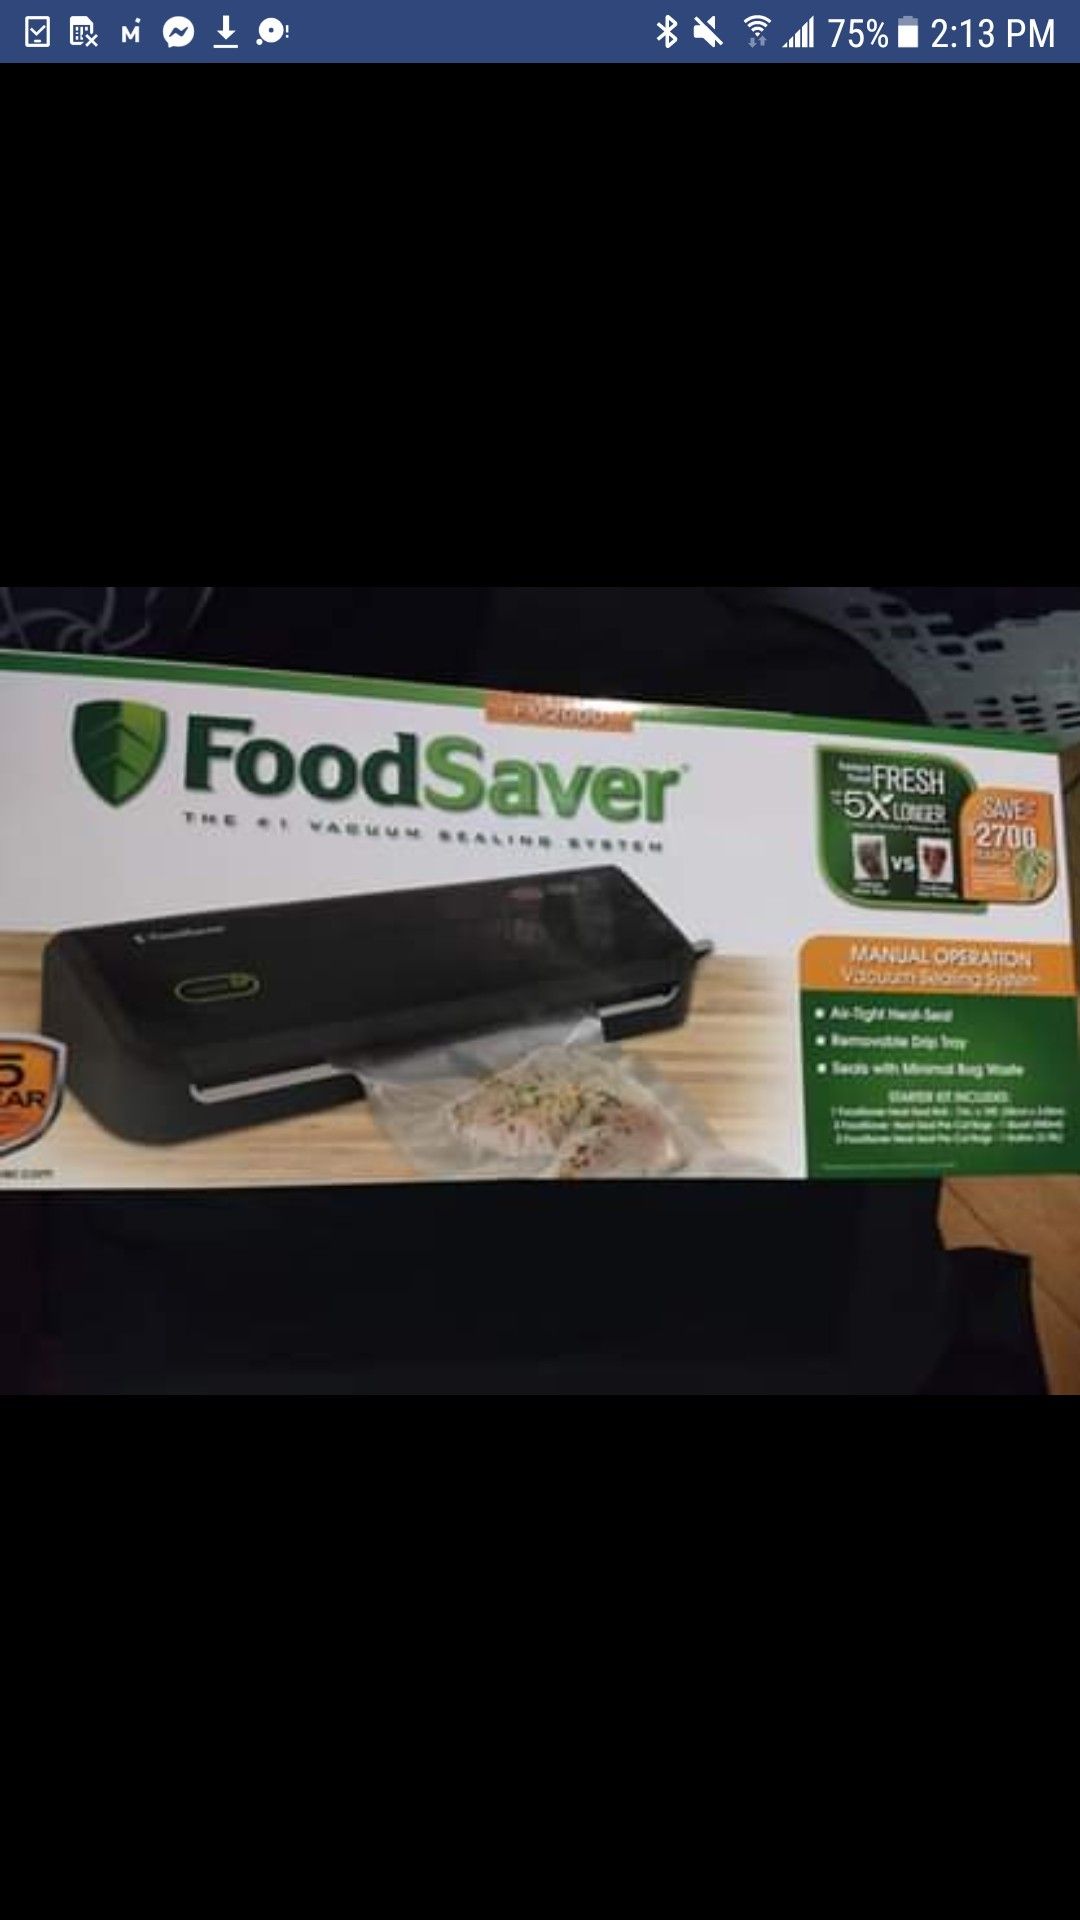 food saver brand new still in the box